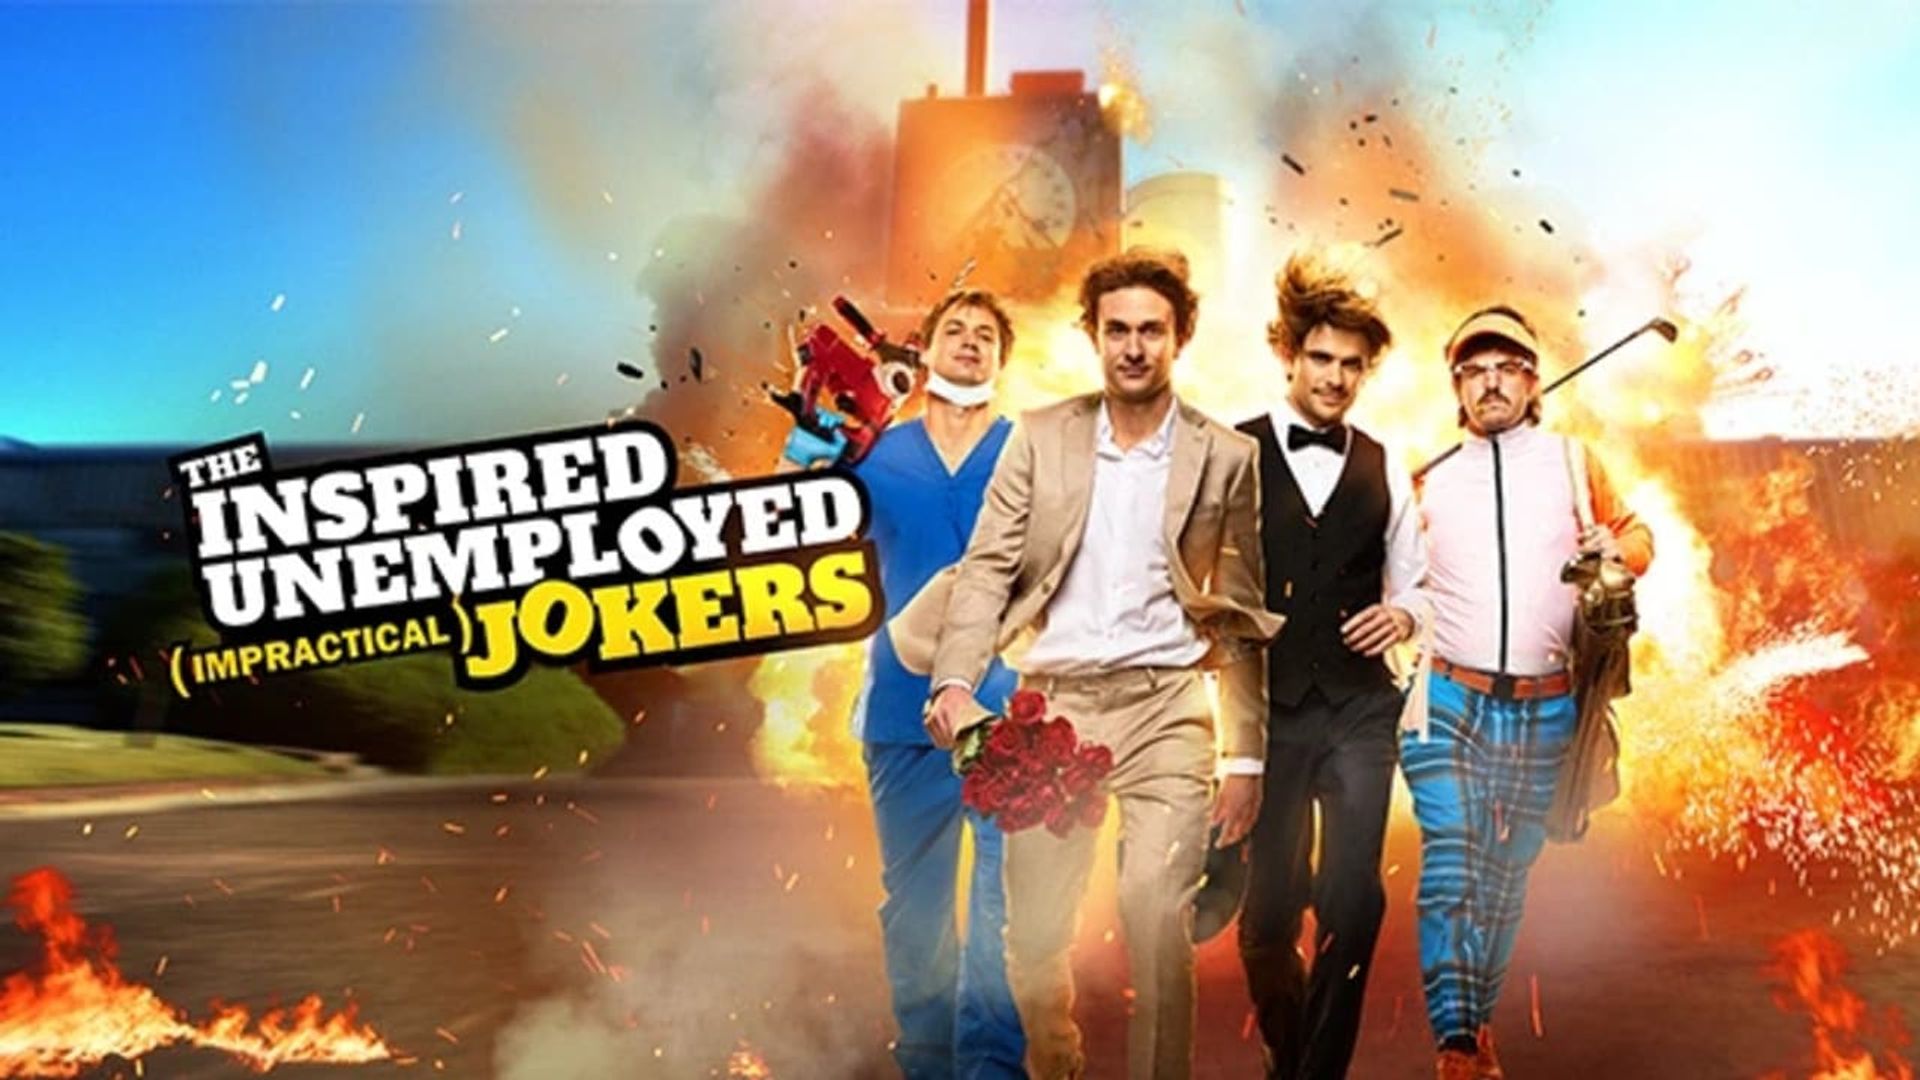 The Inspired Unemployed background